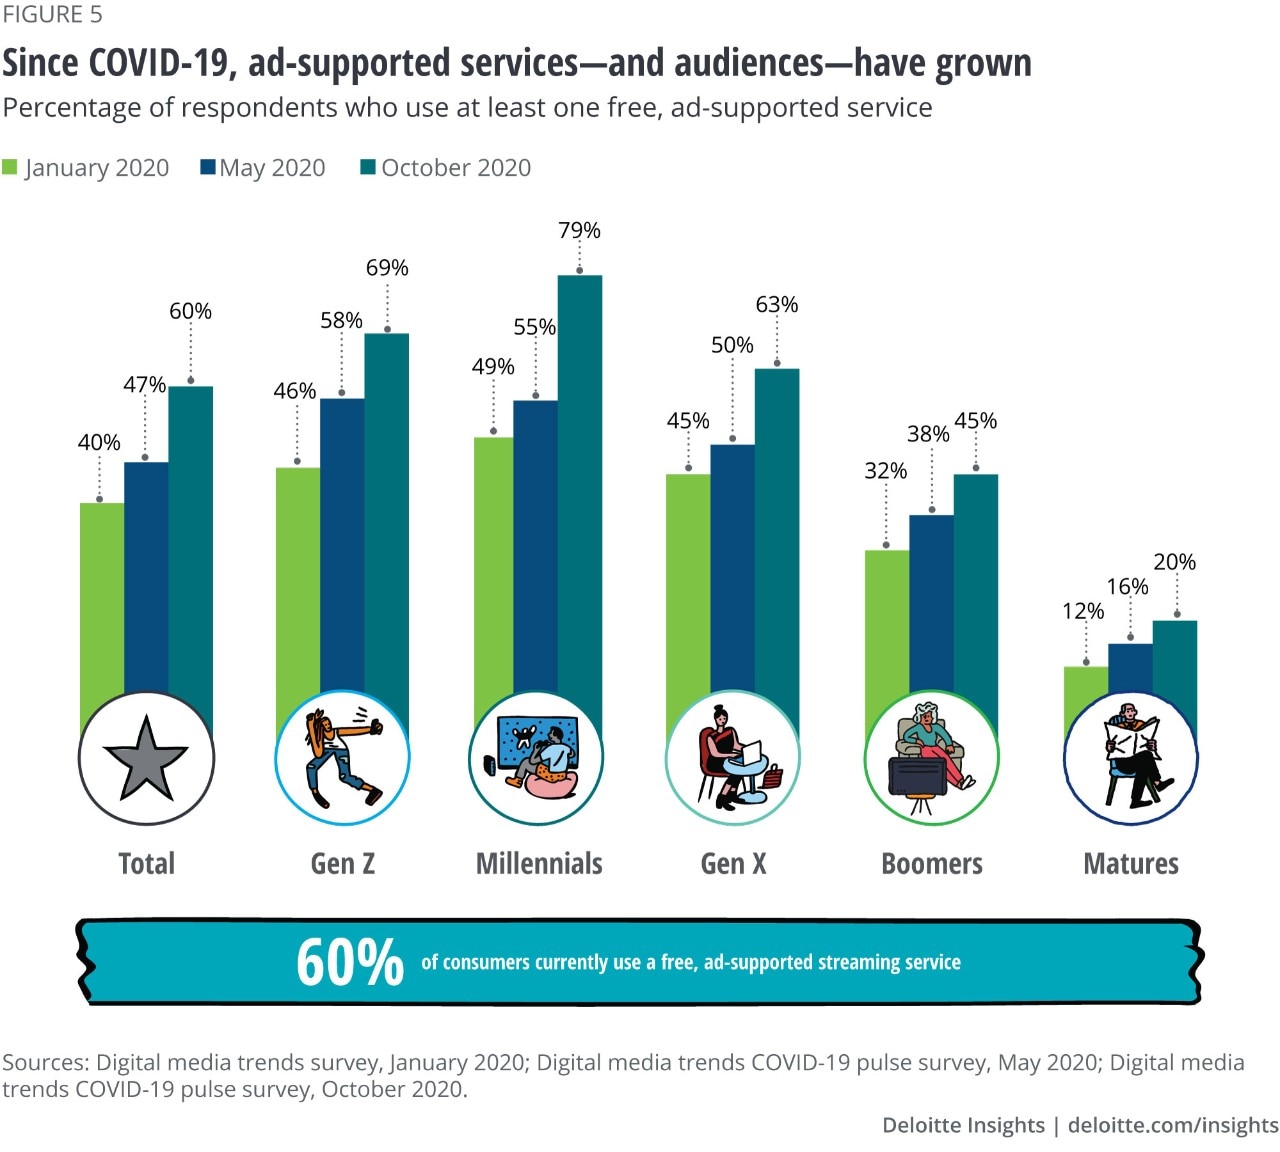 Figure 5. Since COVID-19, ad-supported services—and audiences—have grown